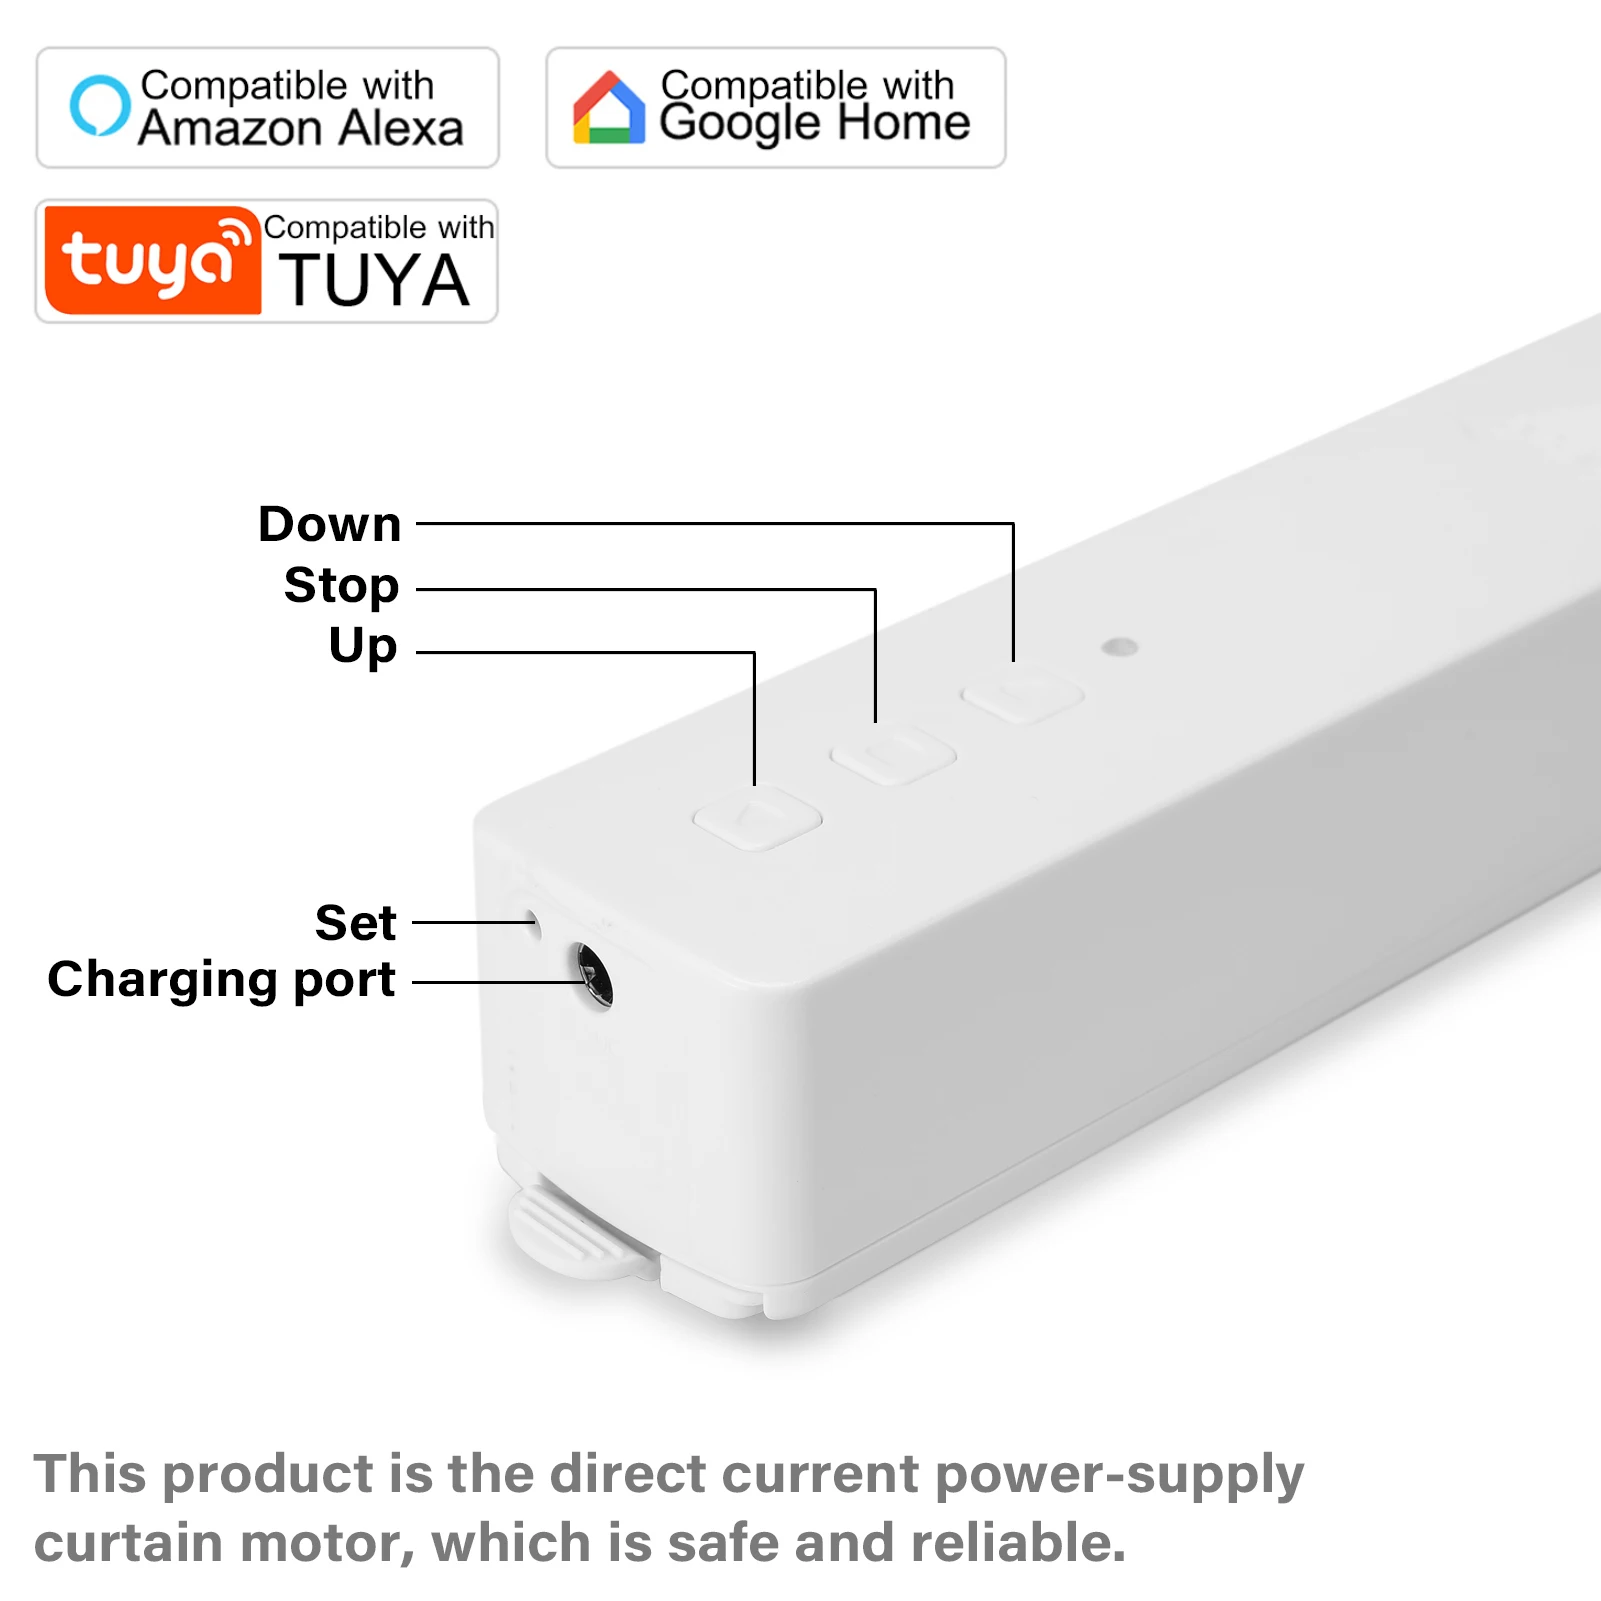 Tuya WIFI Smart Pull Curtain Motor Smart Motorized Chain Roller Blinds Compatible with Alexa Google Home enlarge